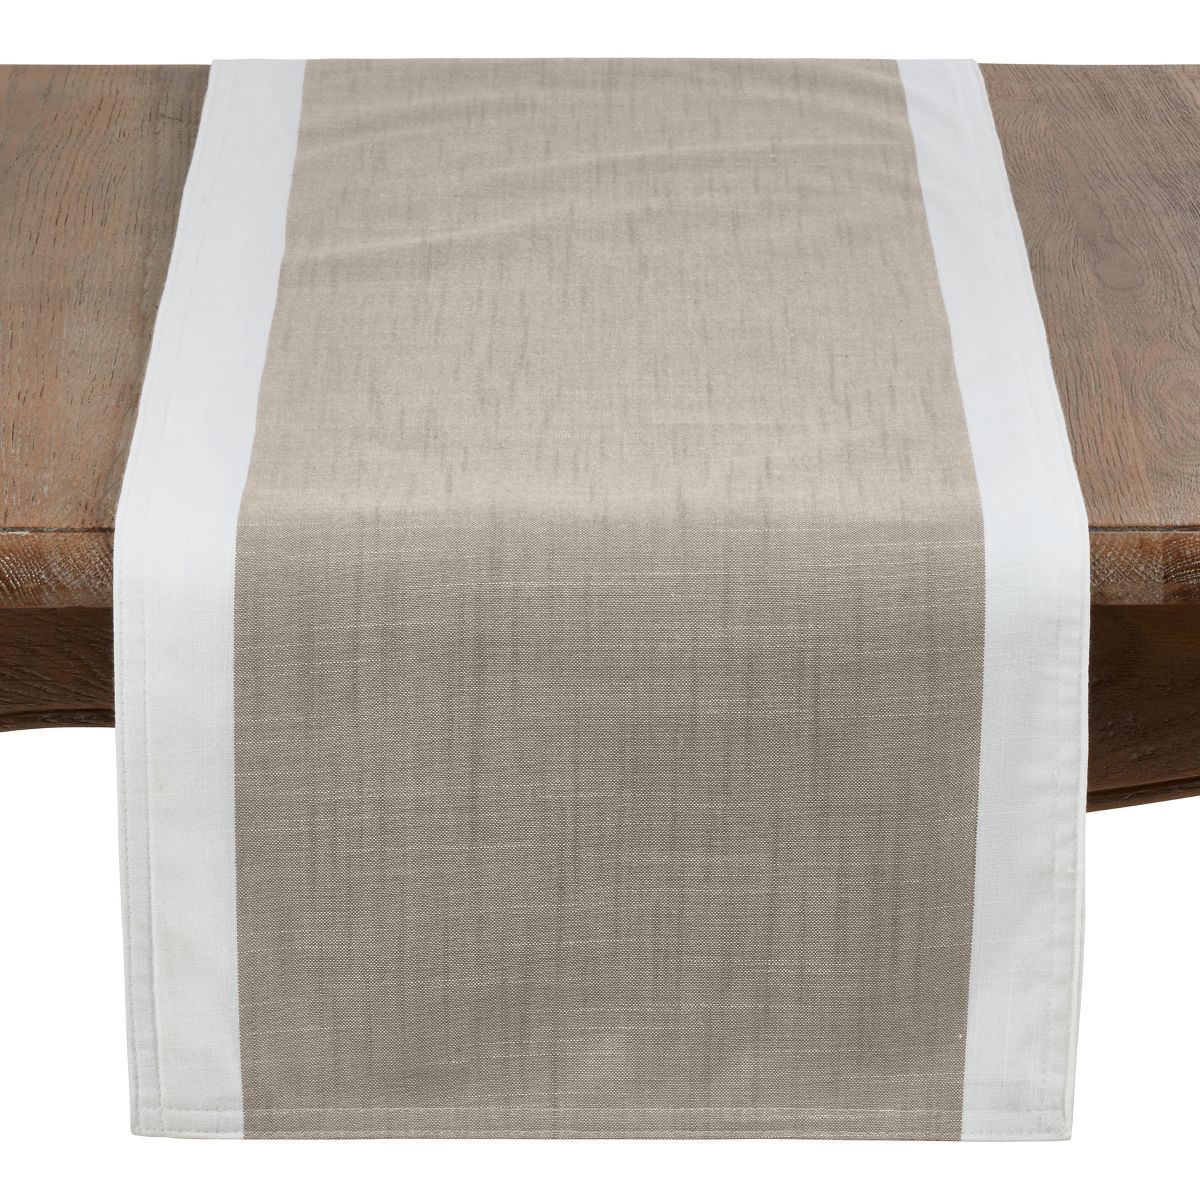 Saro Lifestyle Table Runner With White Banded Border | Target